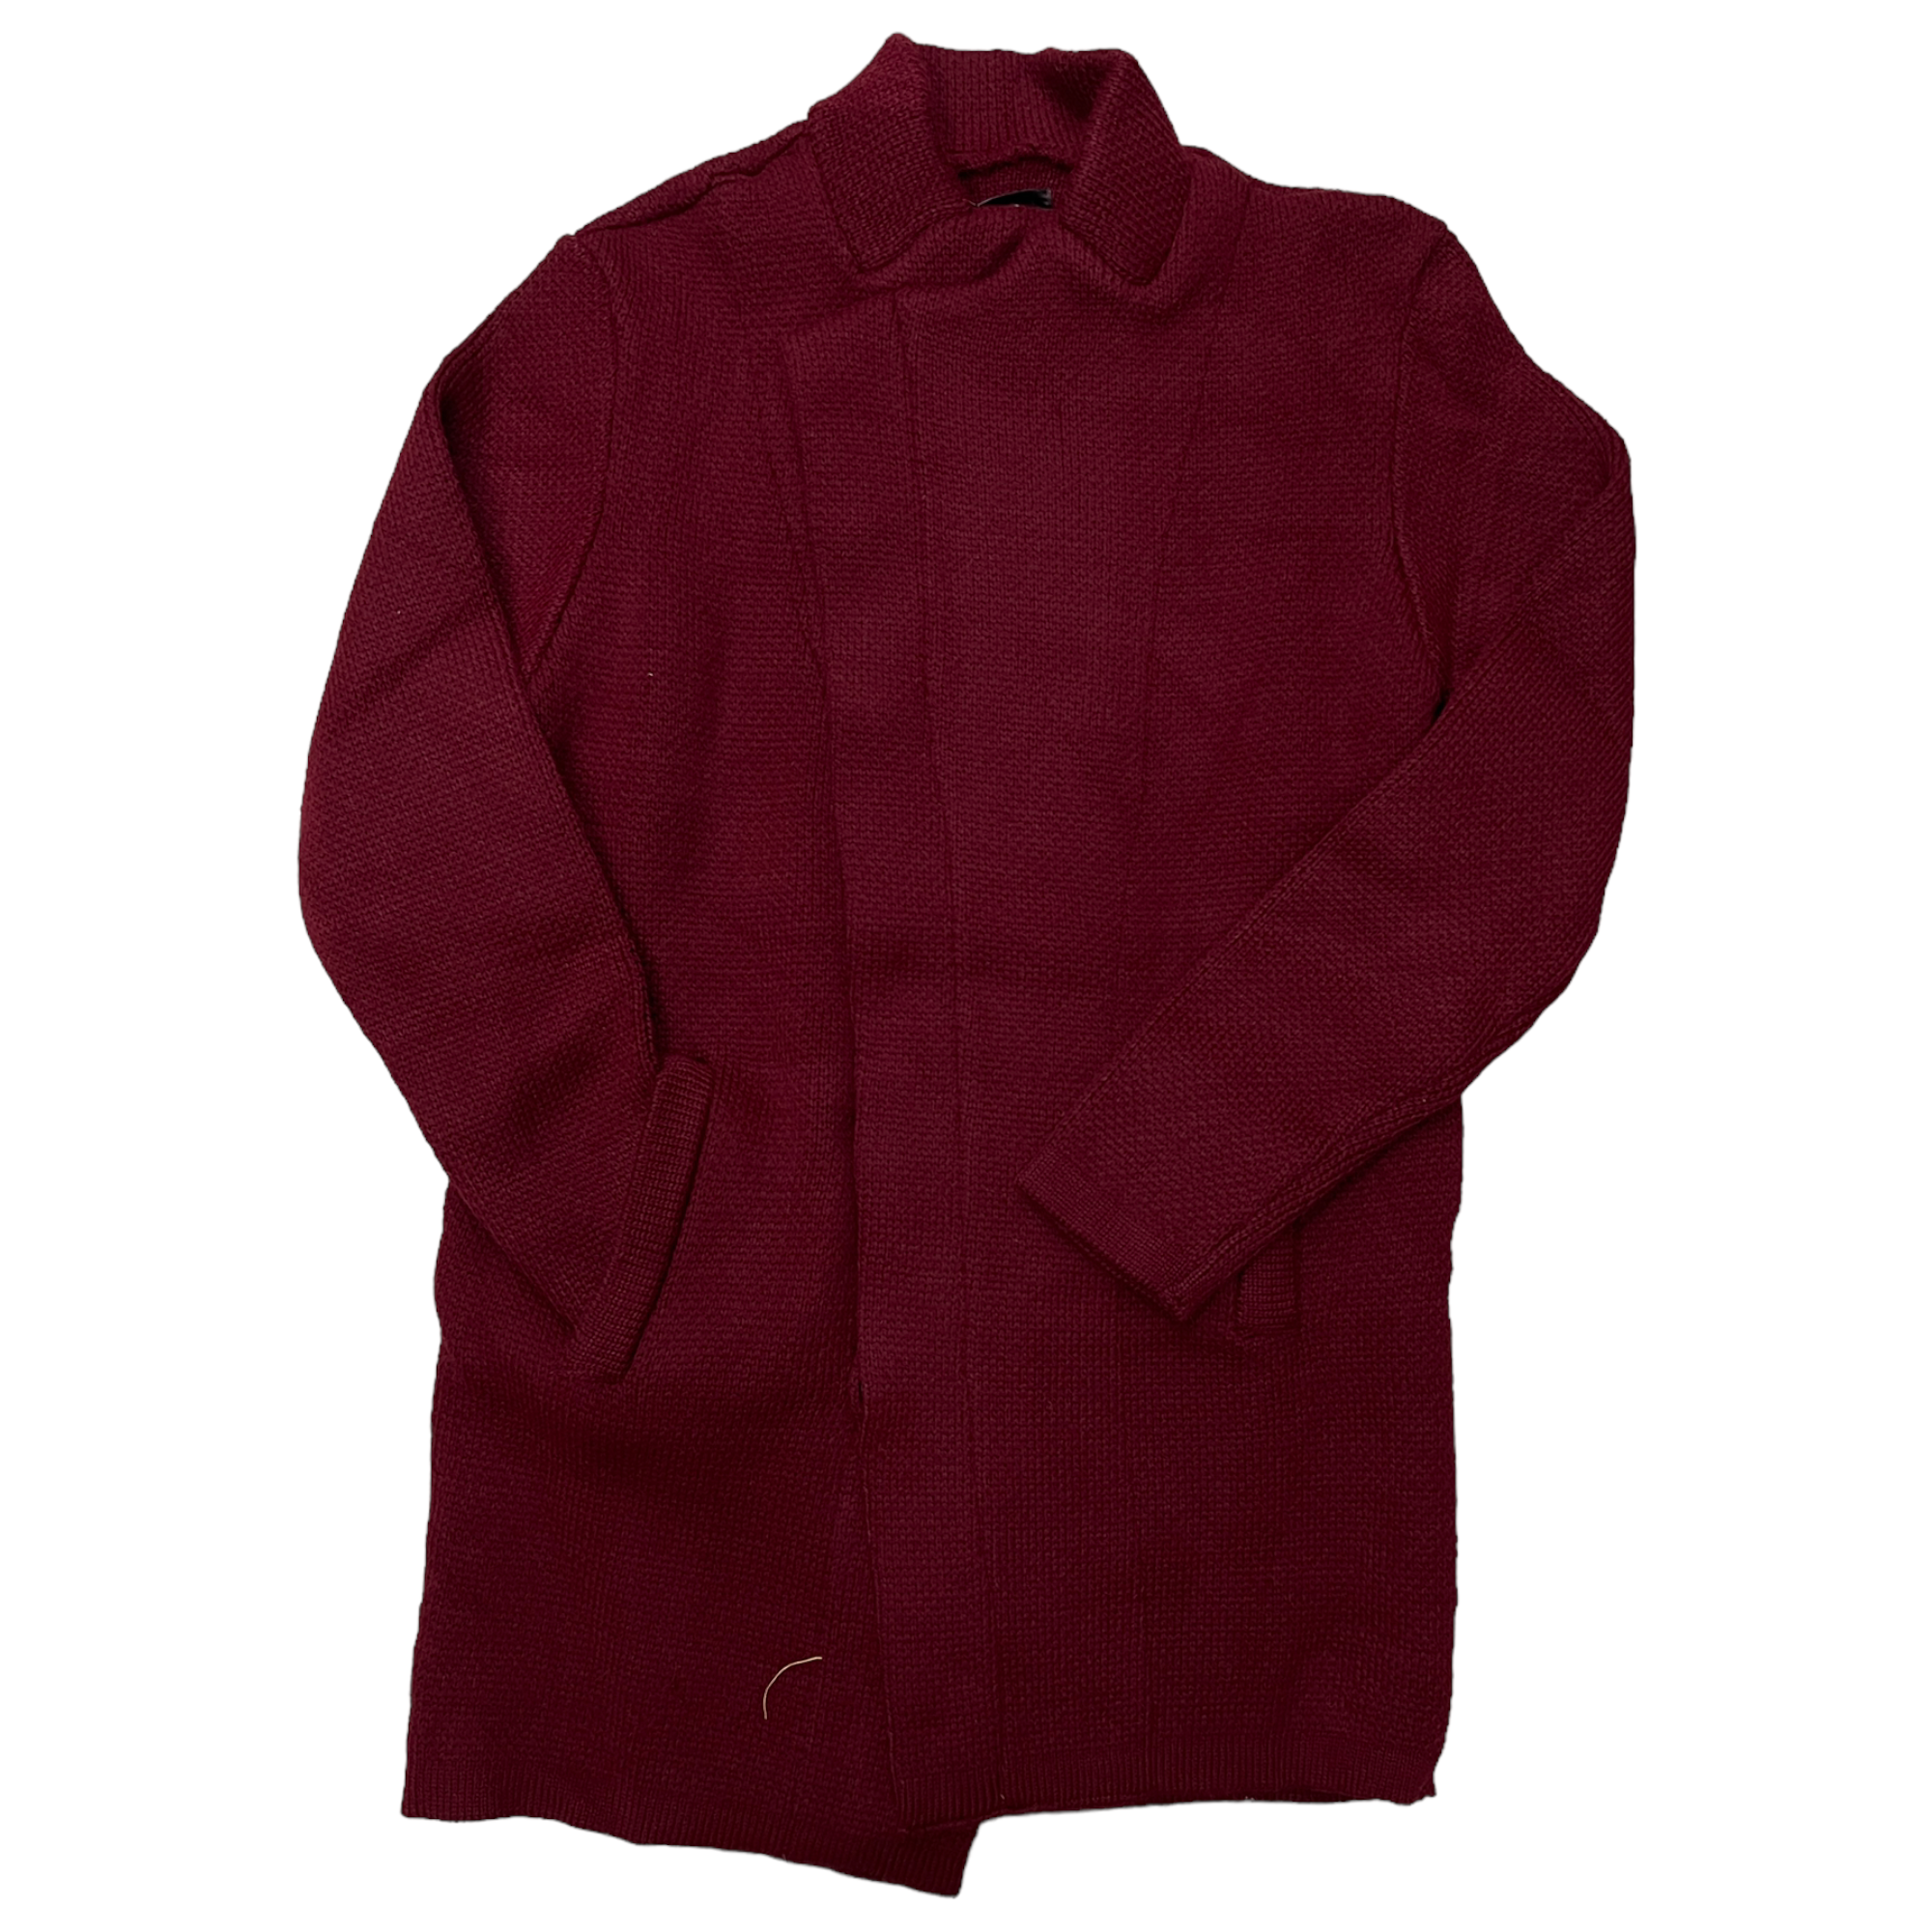 lcr knitted  cardigan sweater Burgundy 6695